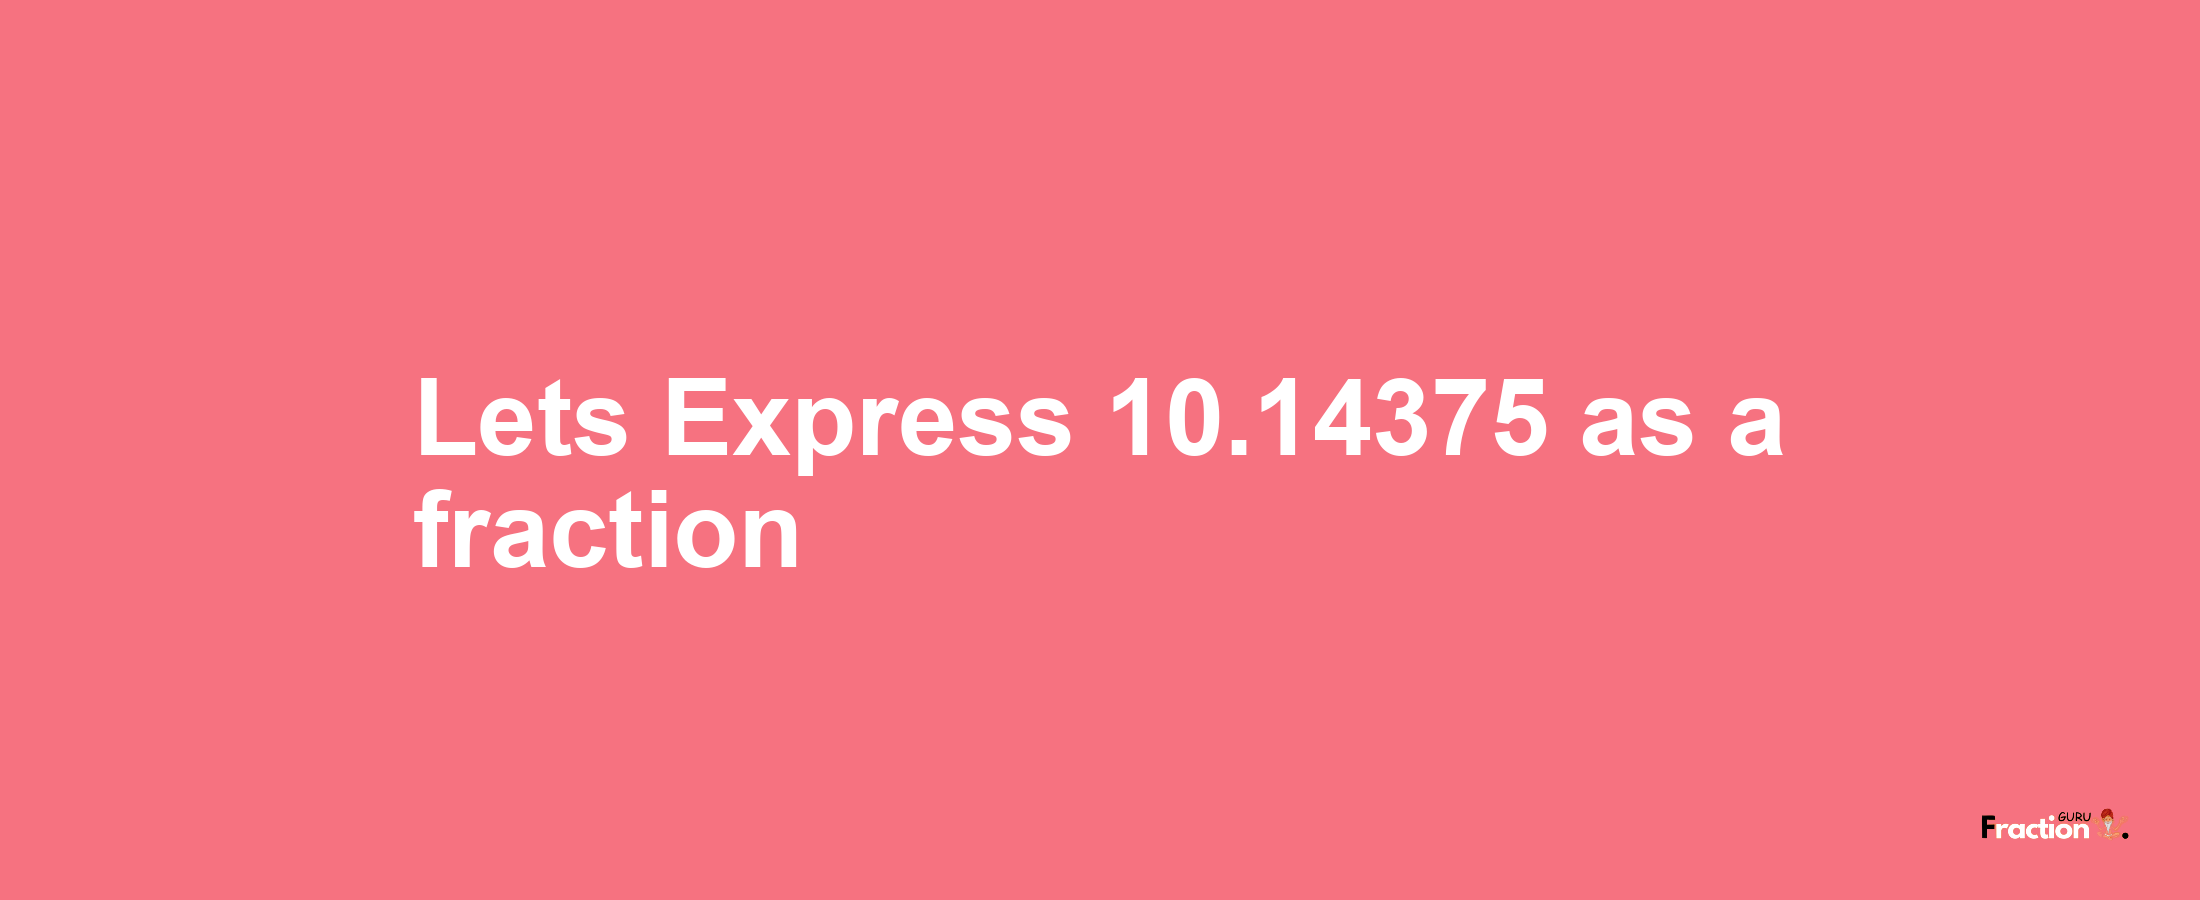 Lets Express 10.14375 as afraction